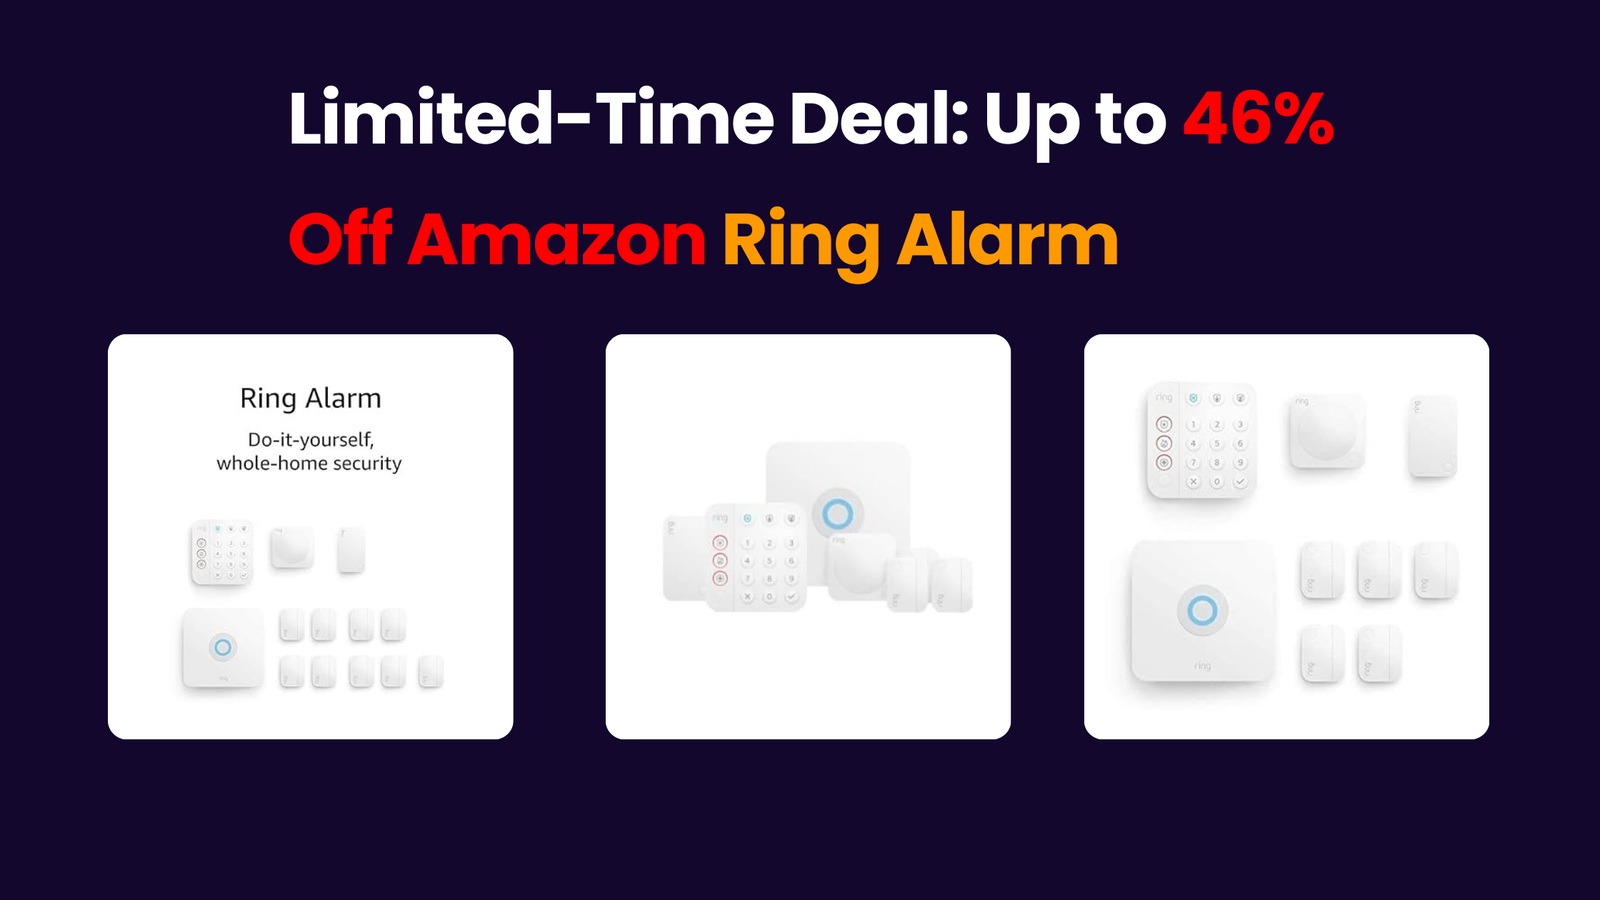 Ring Alarm 5 Piece Kit (2nd Generation) by Amazon – home security system  with optional Assisted Monitoring - No long-term commitments : Amazon.nl:  DIY & Tools